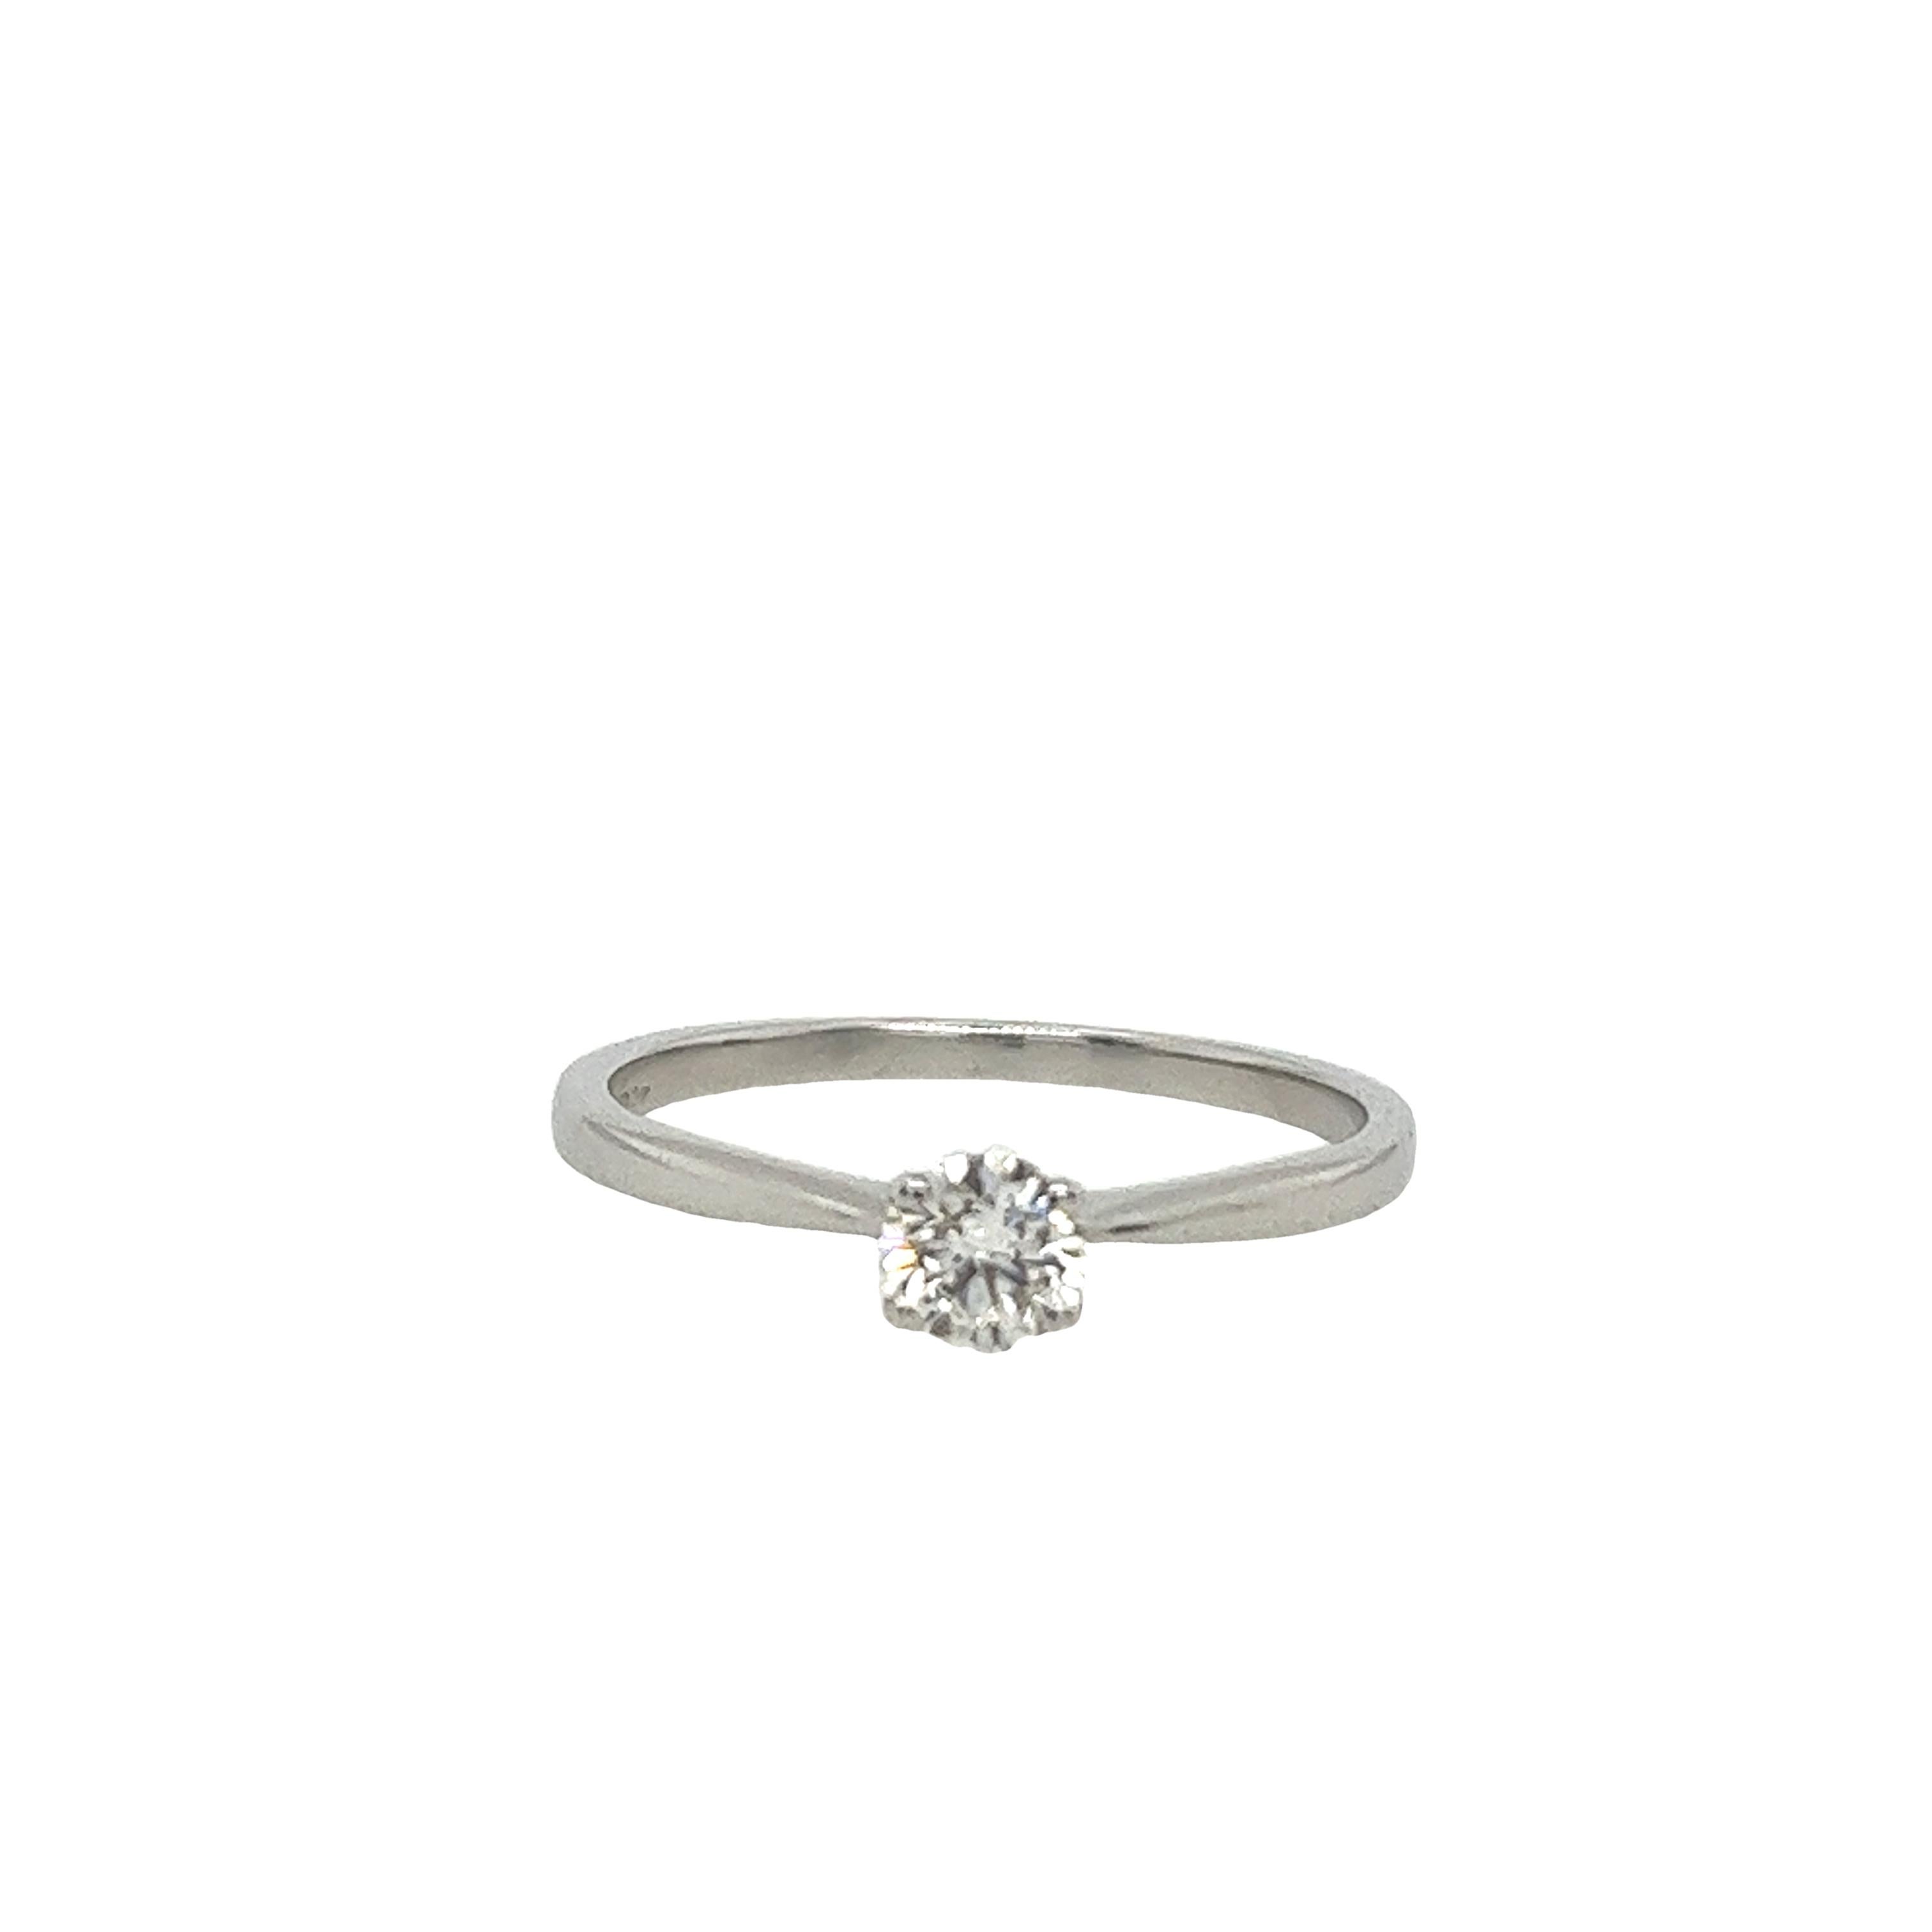 18ct White Gold Diamond Solitaire Ring Set With 0.31ct E/SI1 For Sale 2